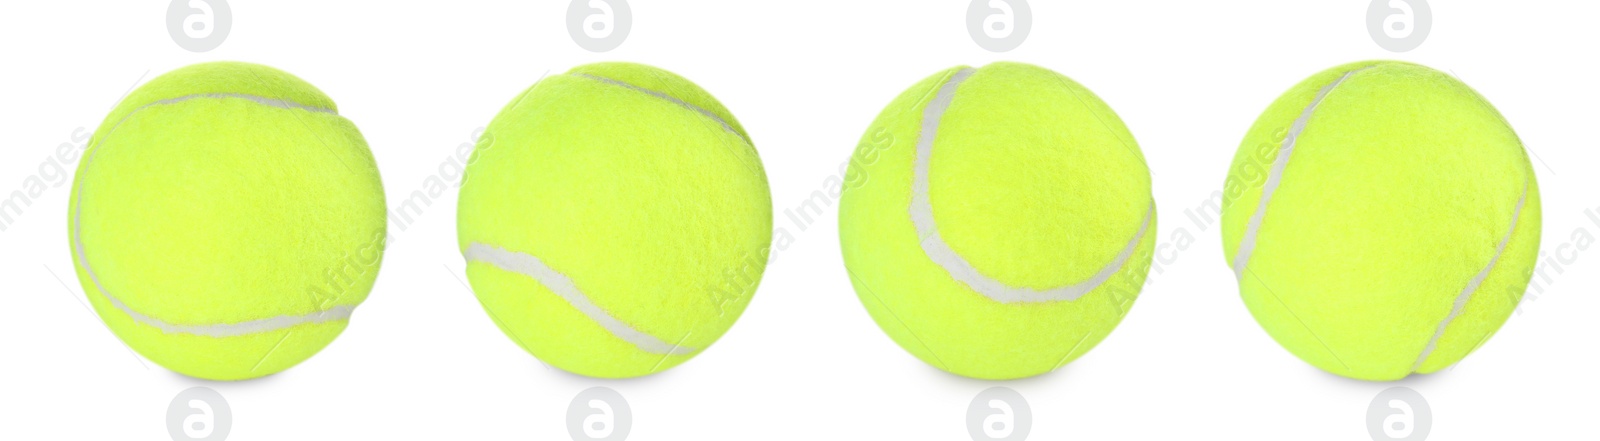 Image of Tennis ball isolated on white, different sides